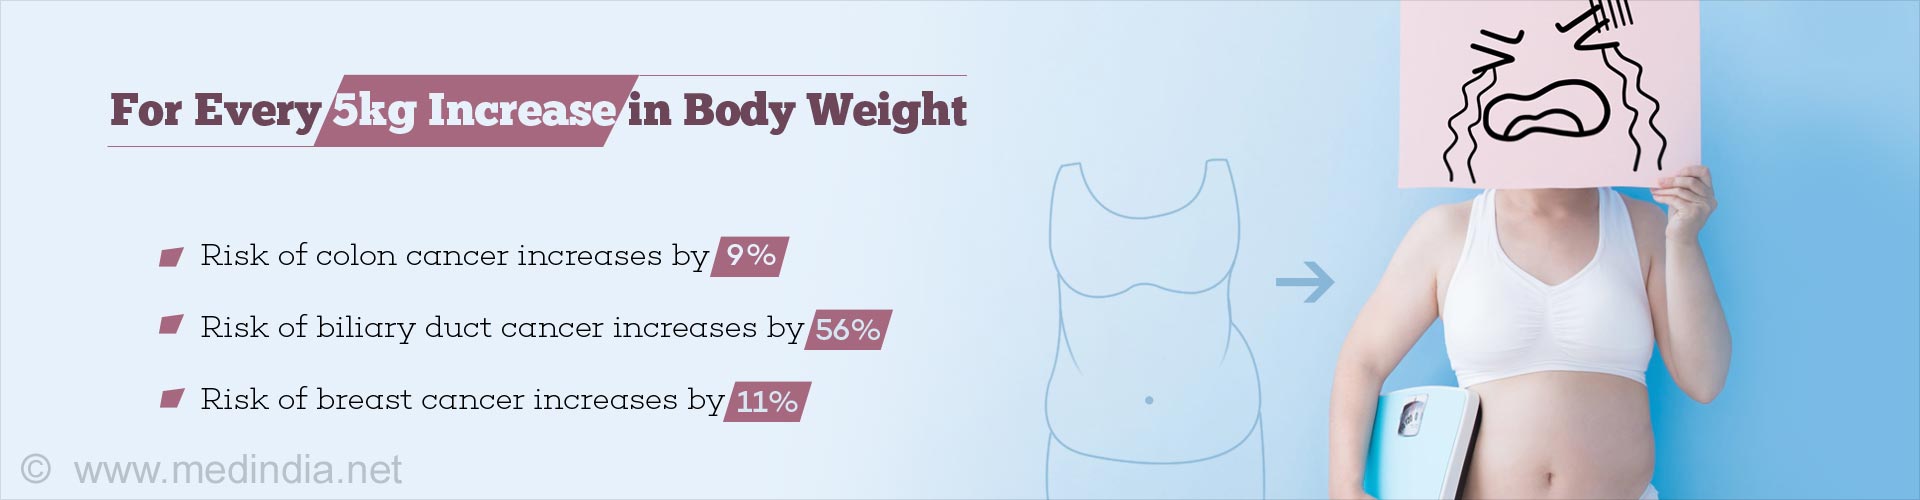 For every 5kg increase in body weight
- risk of coon cancer increases by 9%
- risk of biliary duct cancer increases by 56%
- risk of breast cancer increases by 11%